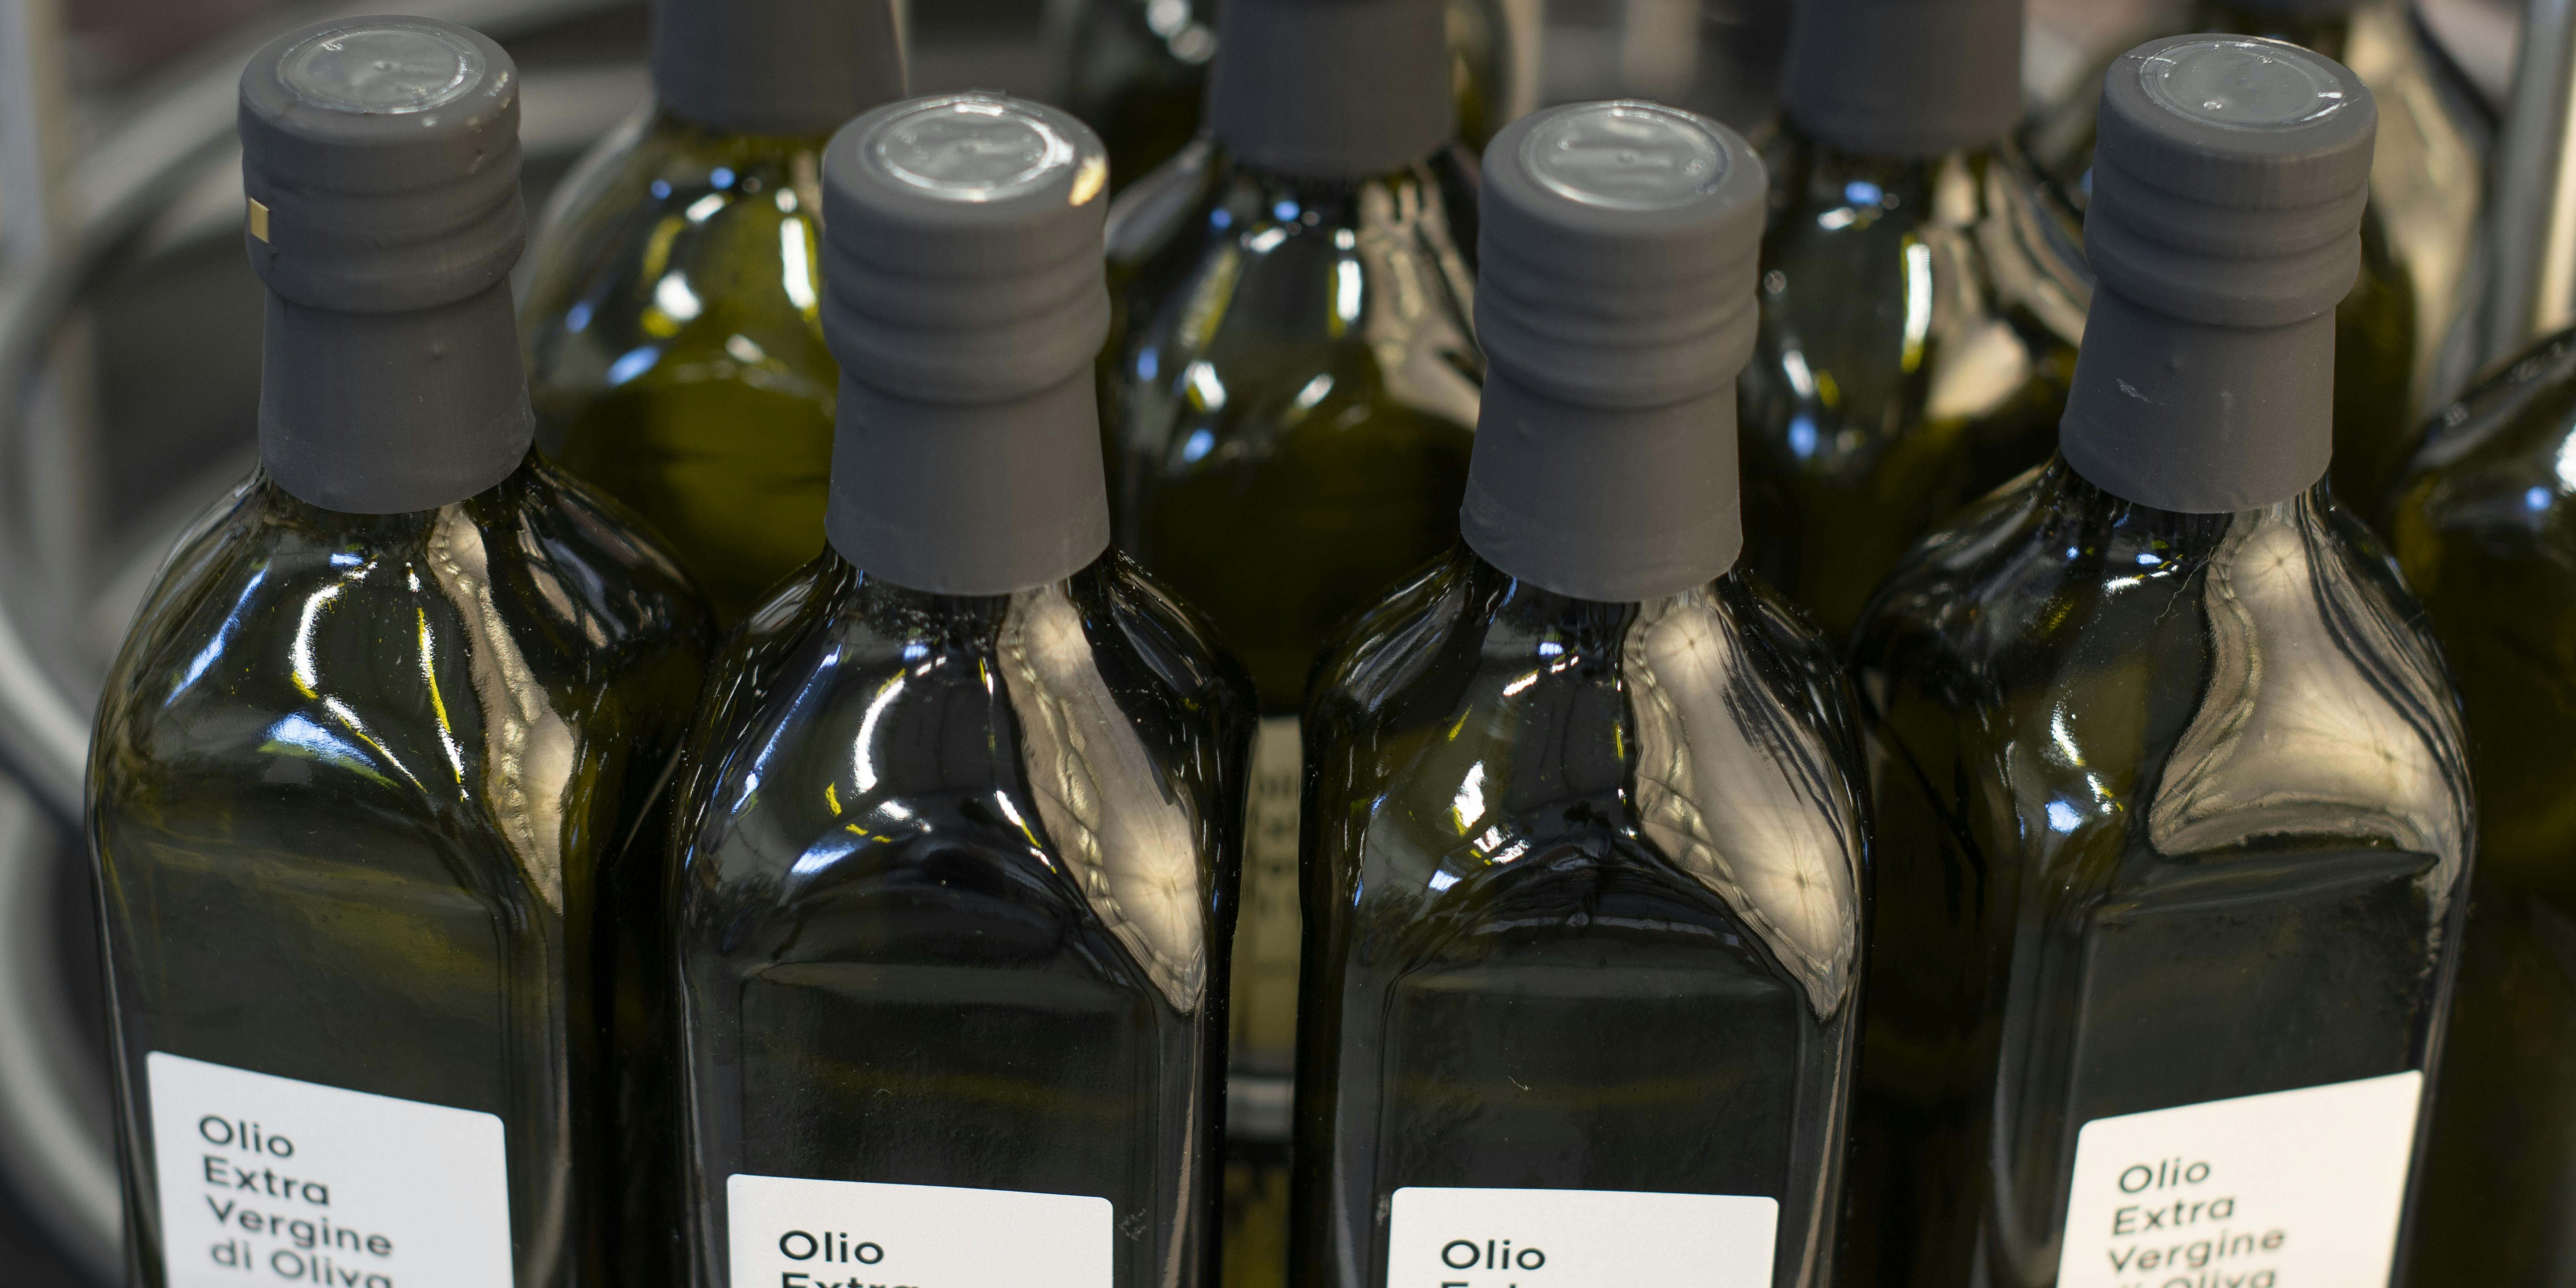 A table suitable for the accumulation of bottles, in this case there are bottles of oil with black caps and personalized Quinti label